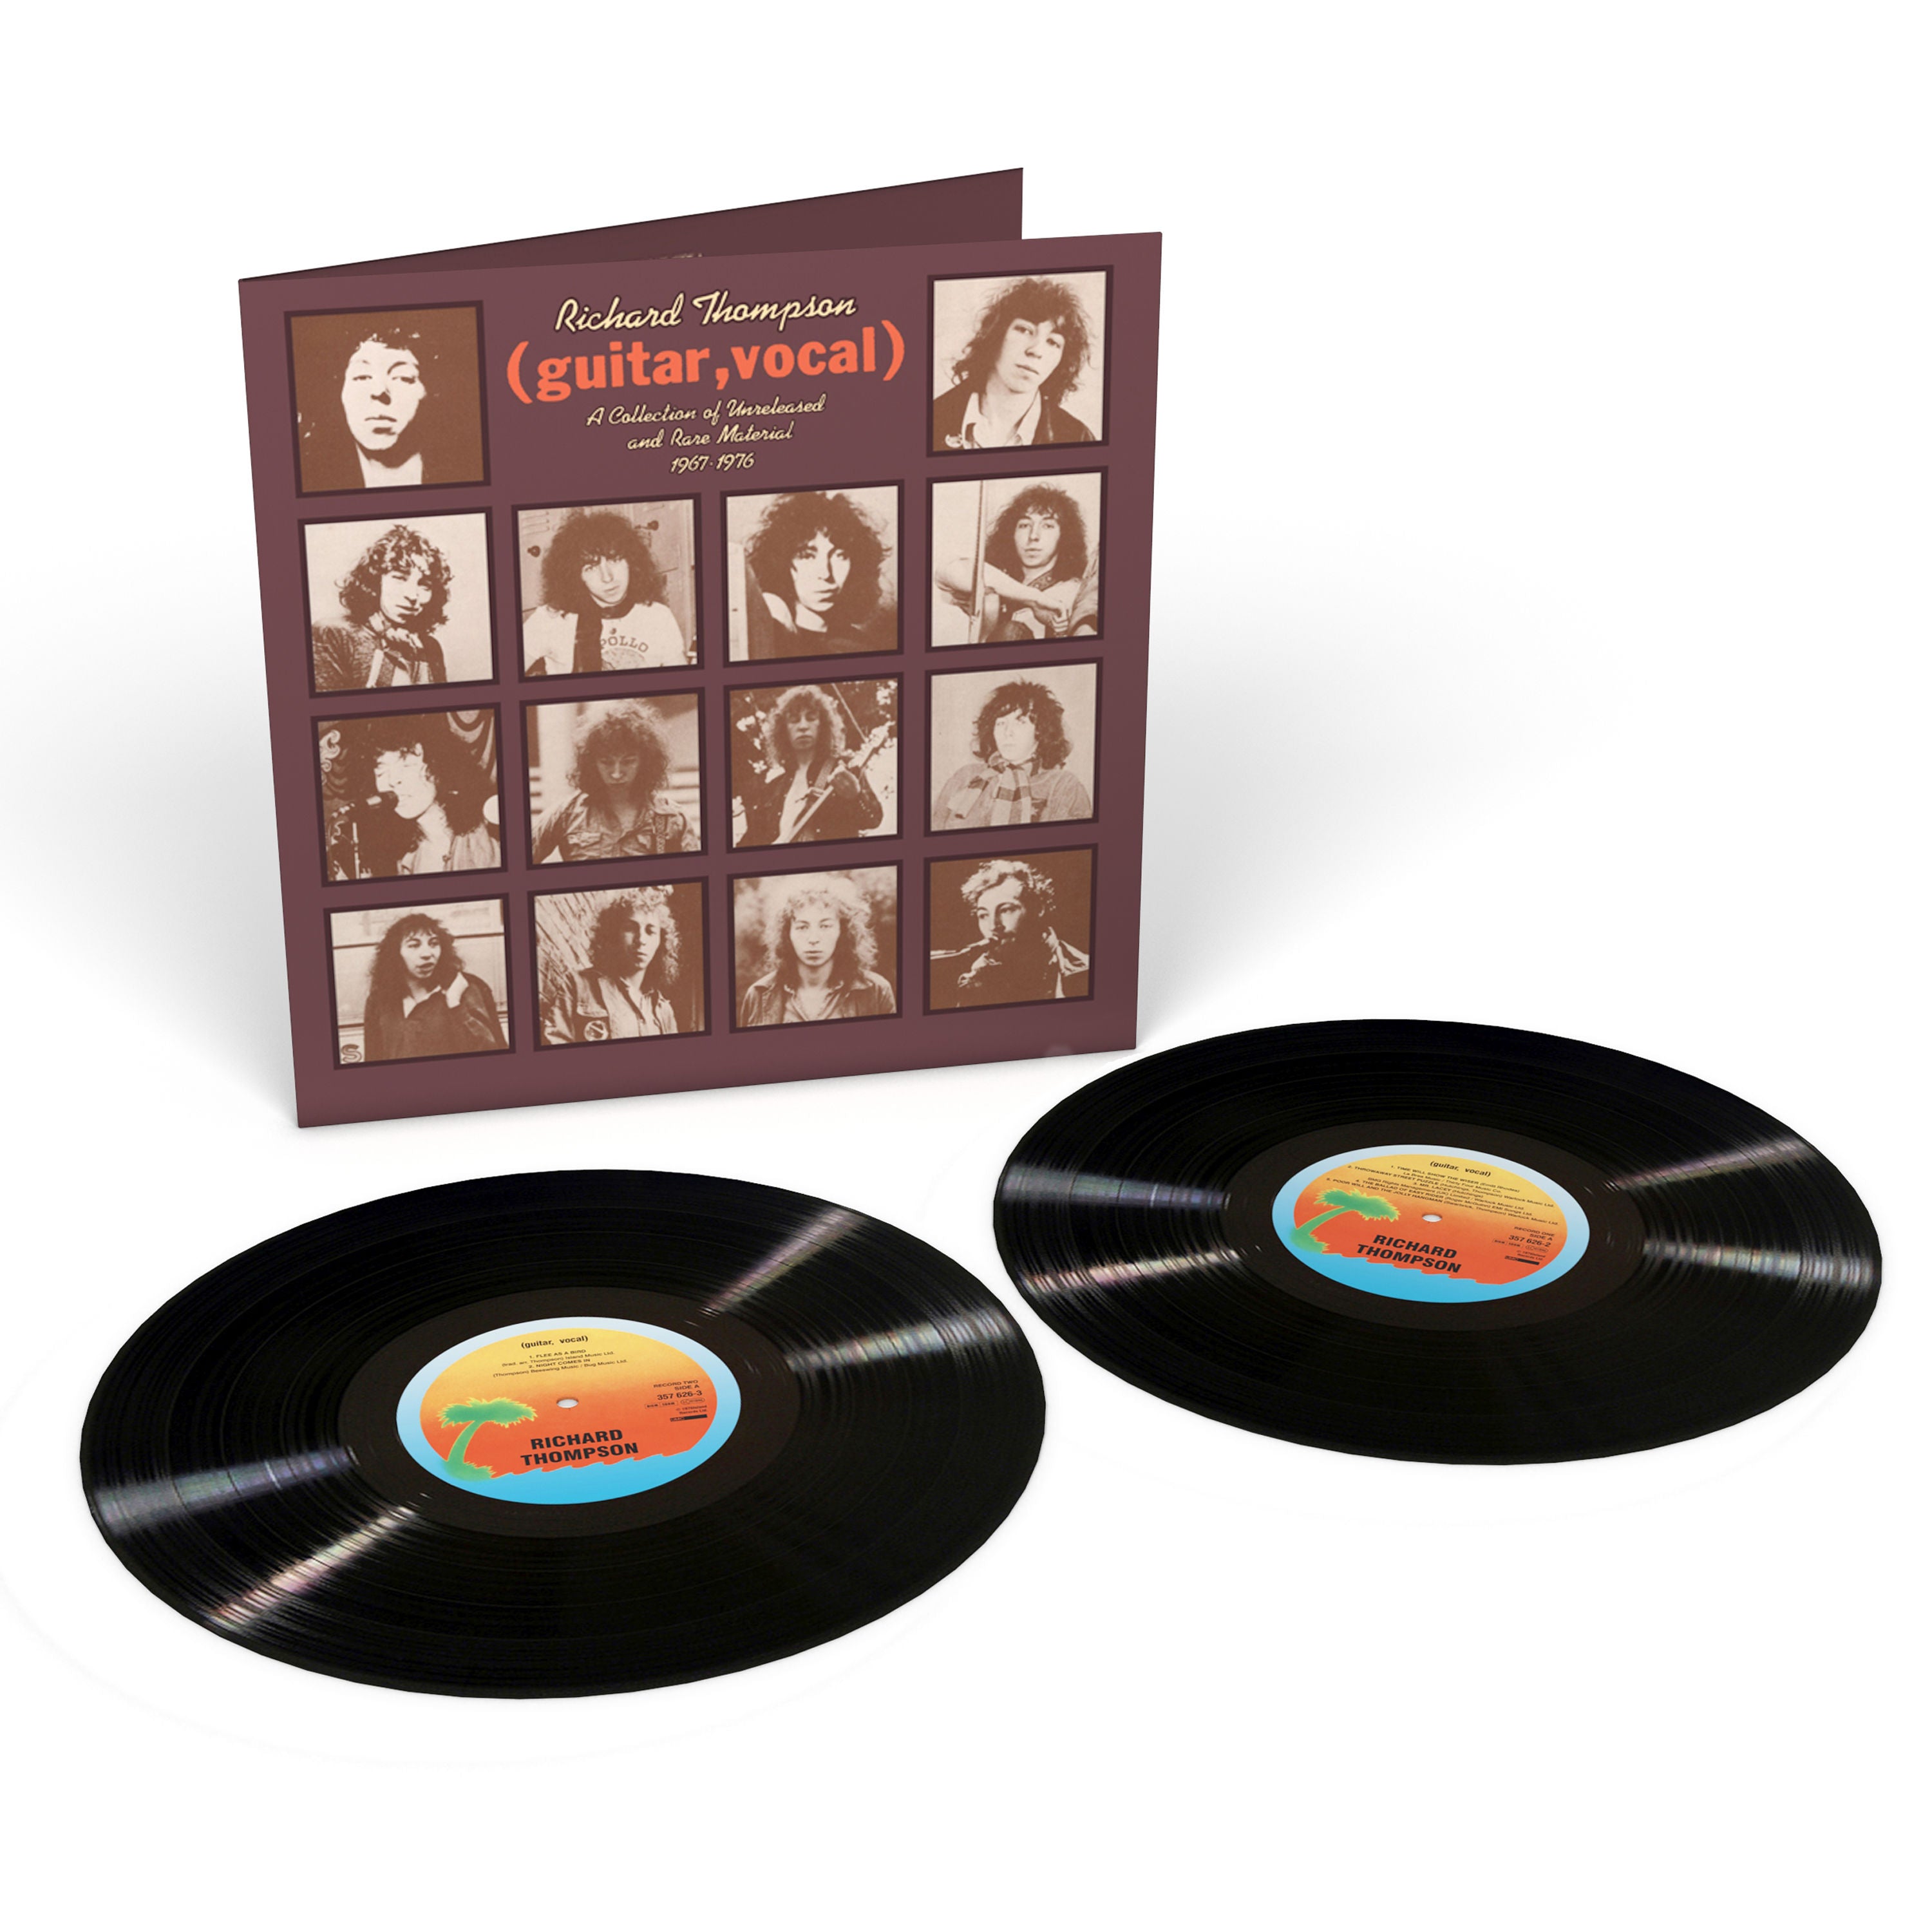 Richard Thompson - (Guitar, Vocal) A Collection Of Unreleased and Rare Material 1967-1976: Vinyl 2LP